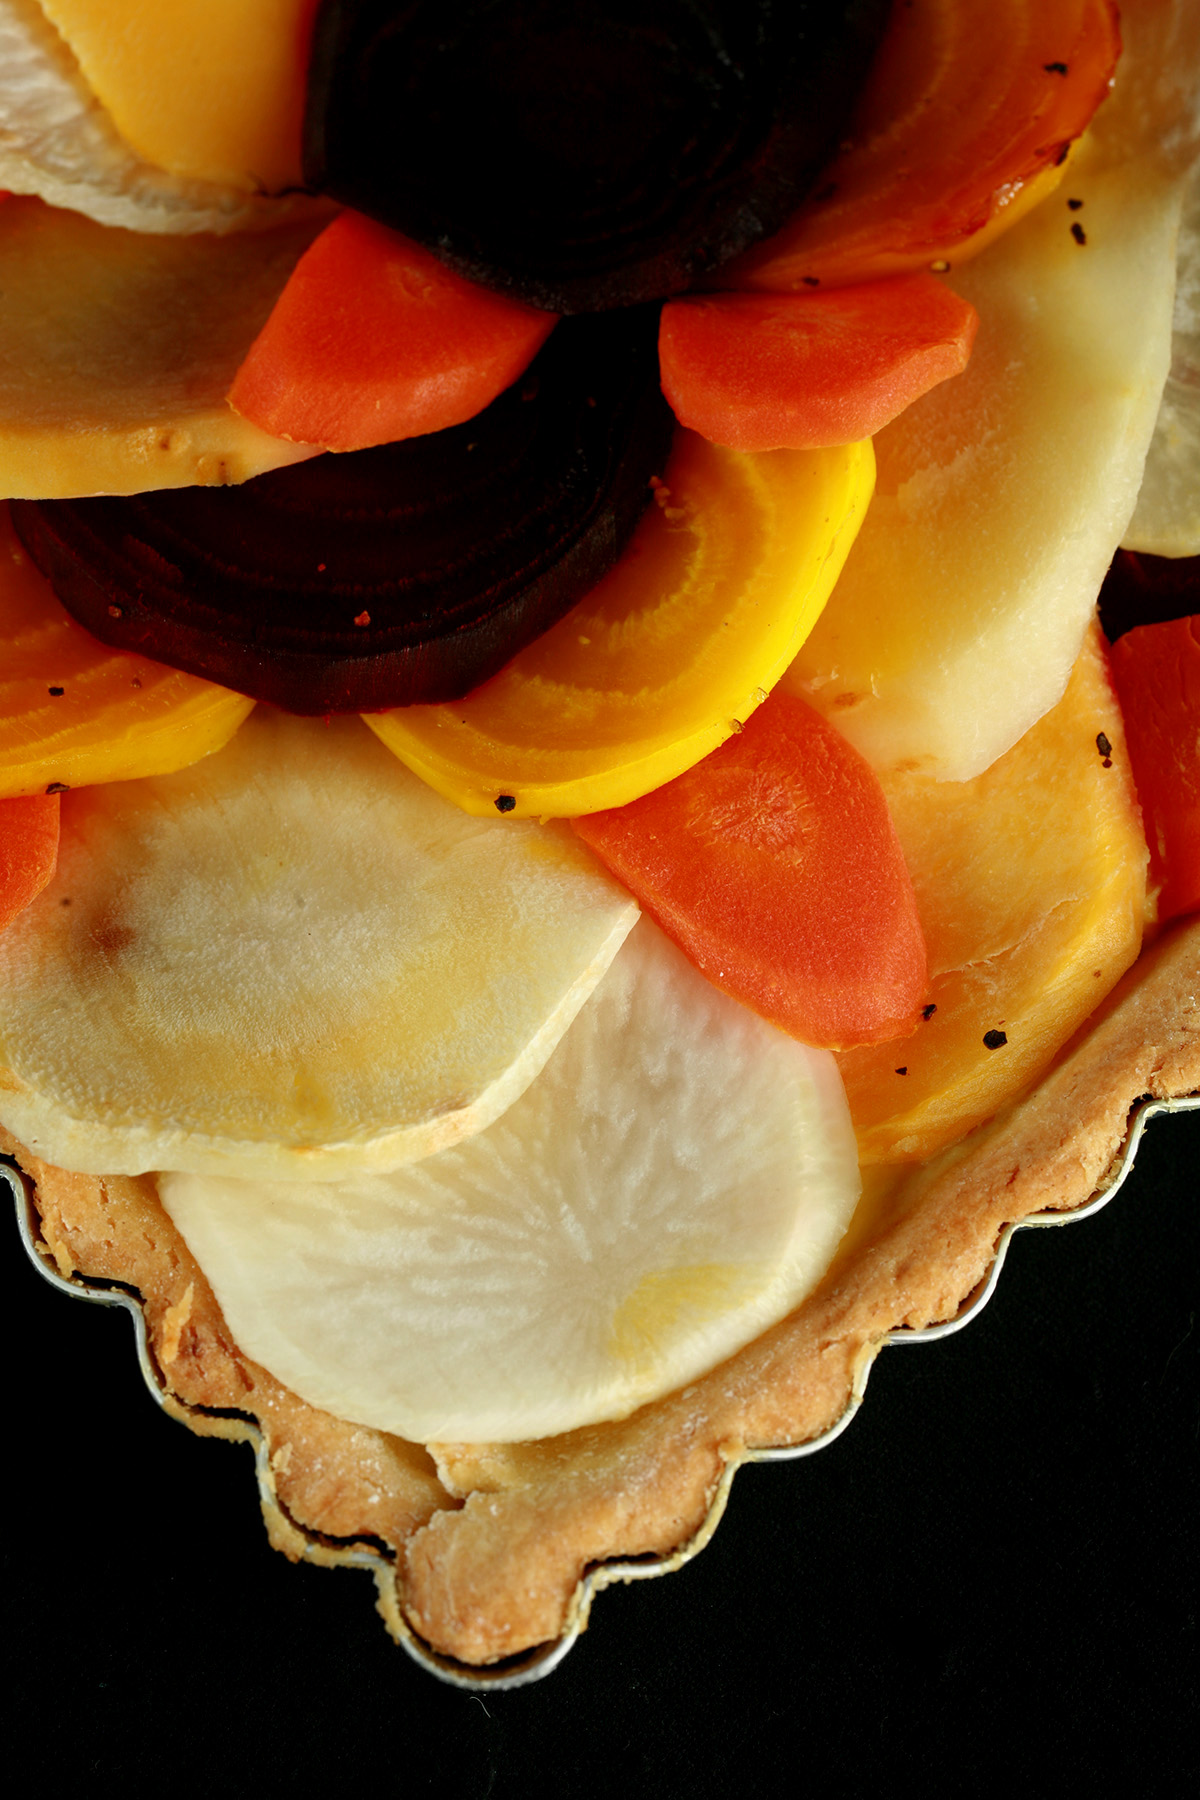 A close up view of a square root tart - a tart cooked in a square pan, with slices of a variety of root veggies arranged on top.